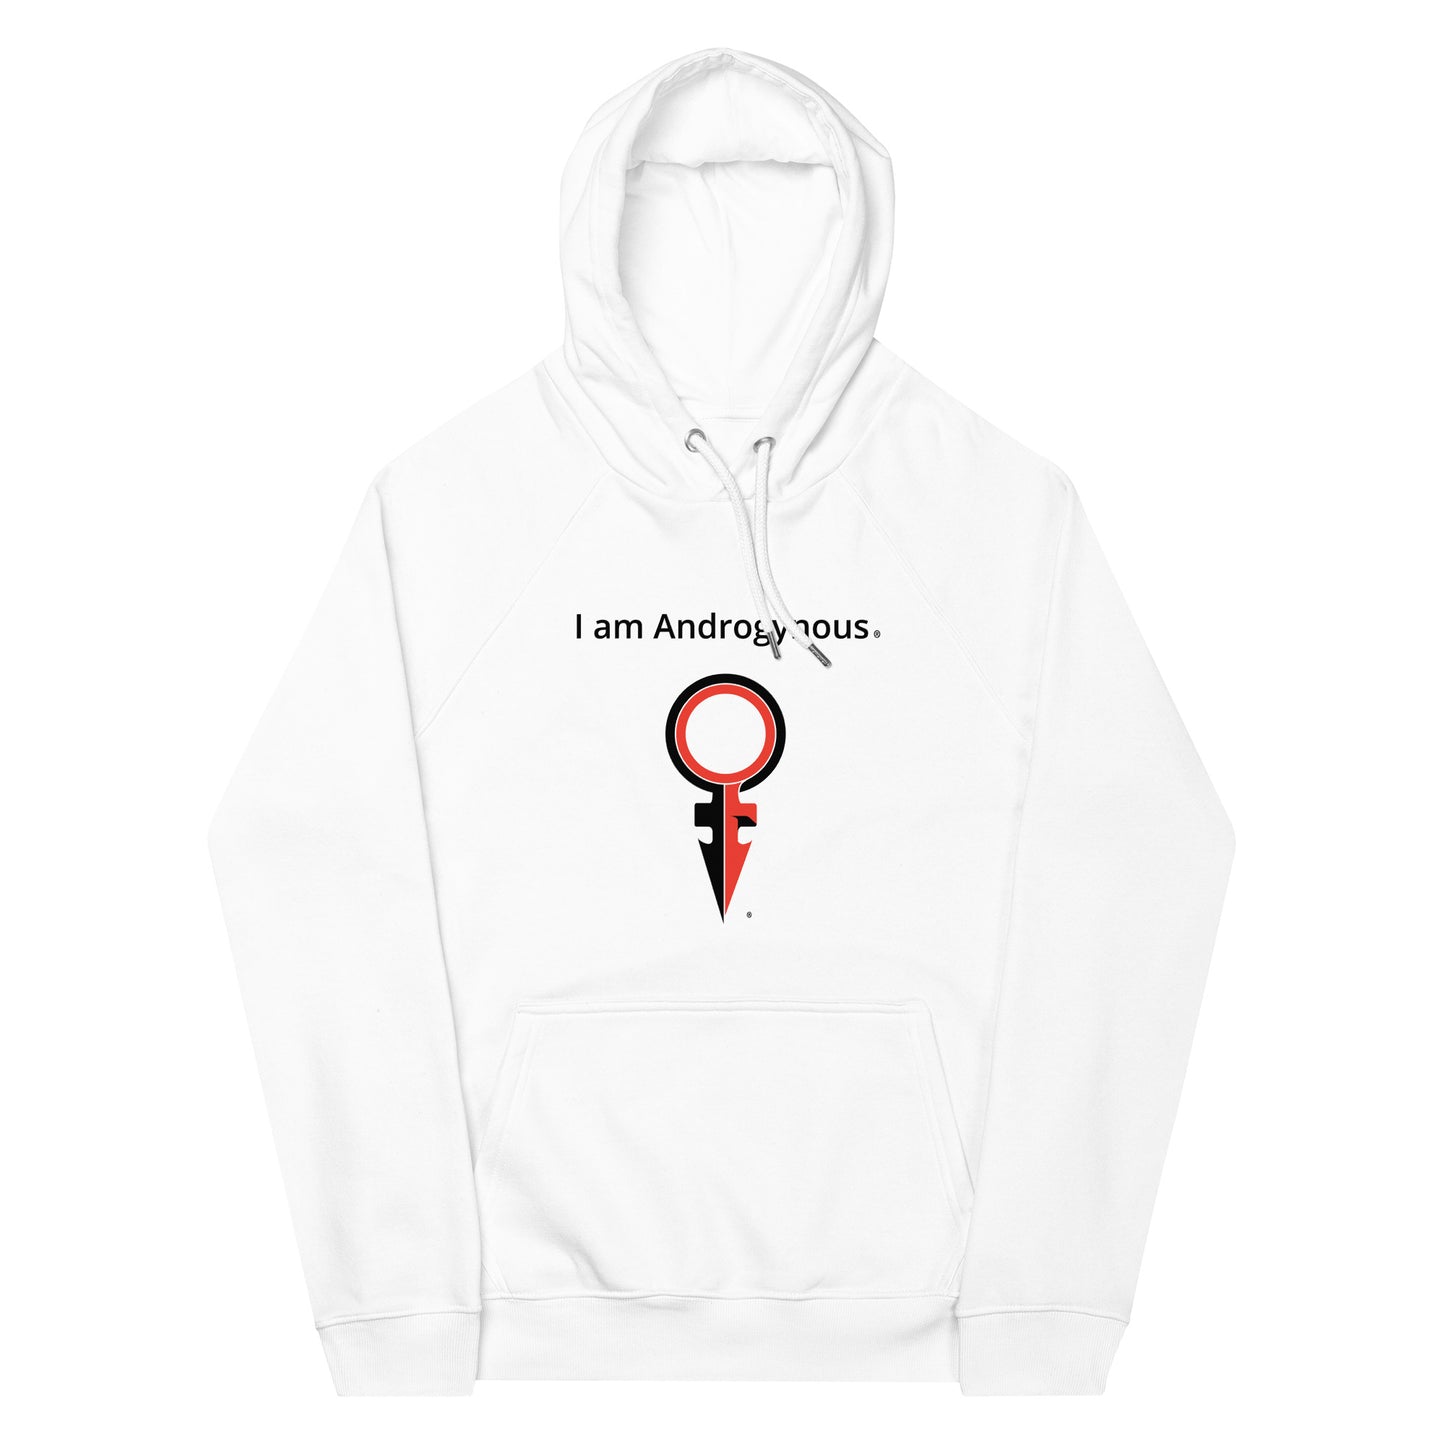 I AM ANDROGYNOUS + SYMBOL BLACK AND RED ON WHITE PRINTED RINGSPUN Unisex eco raglan hoodie